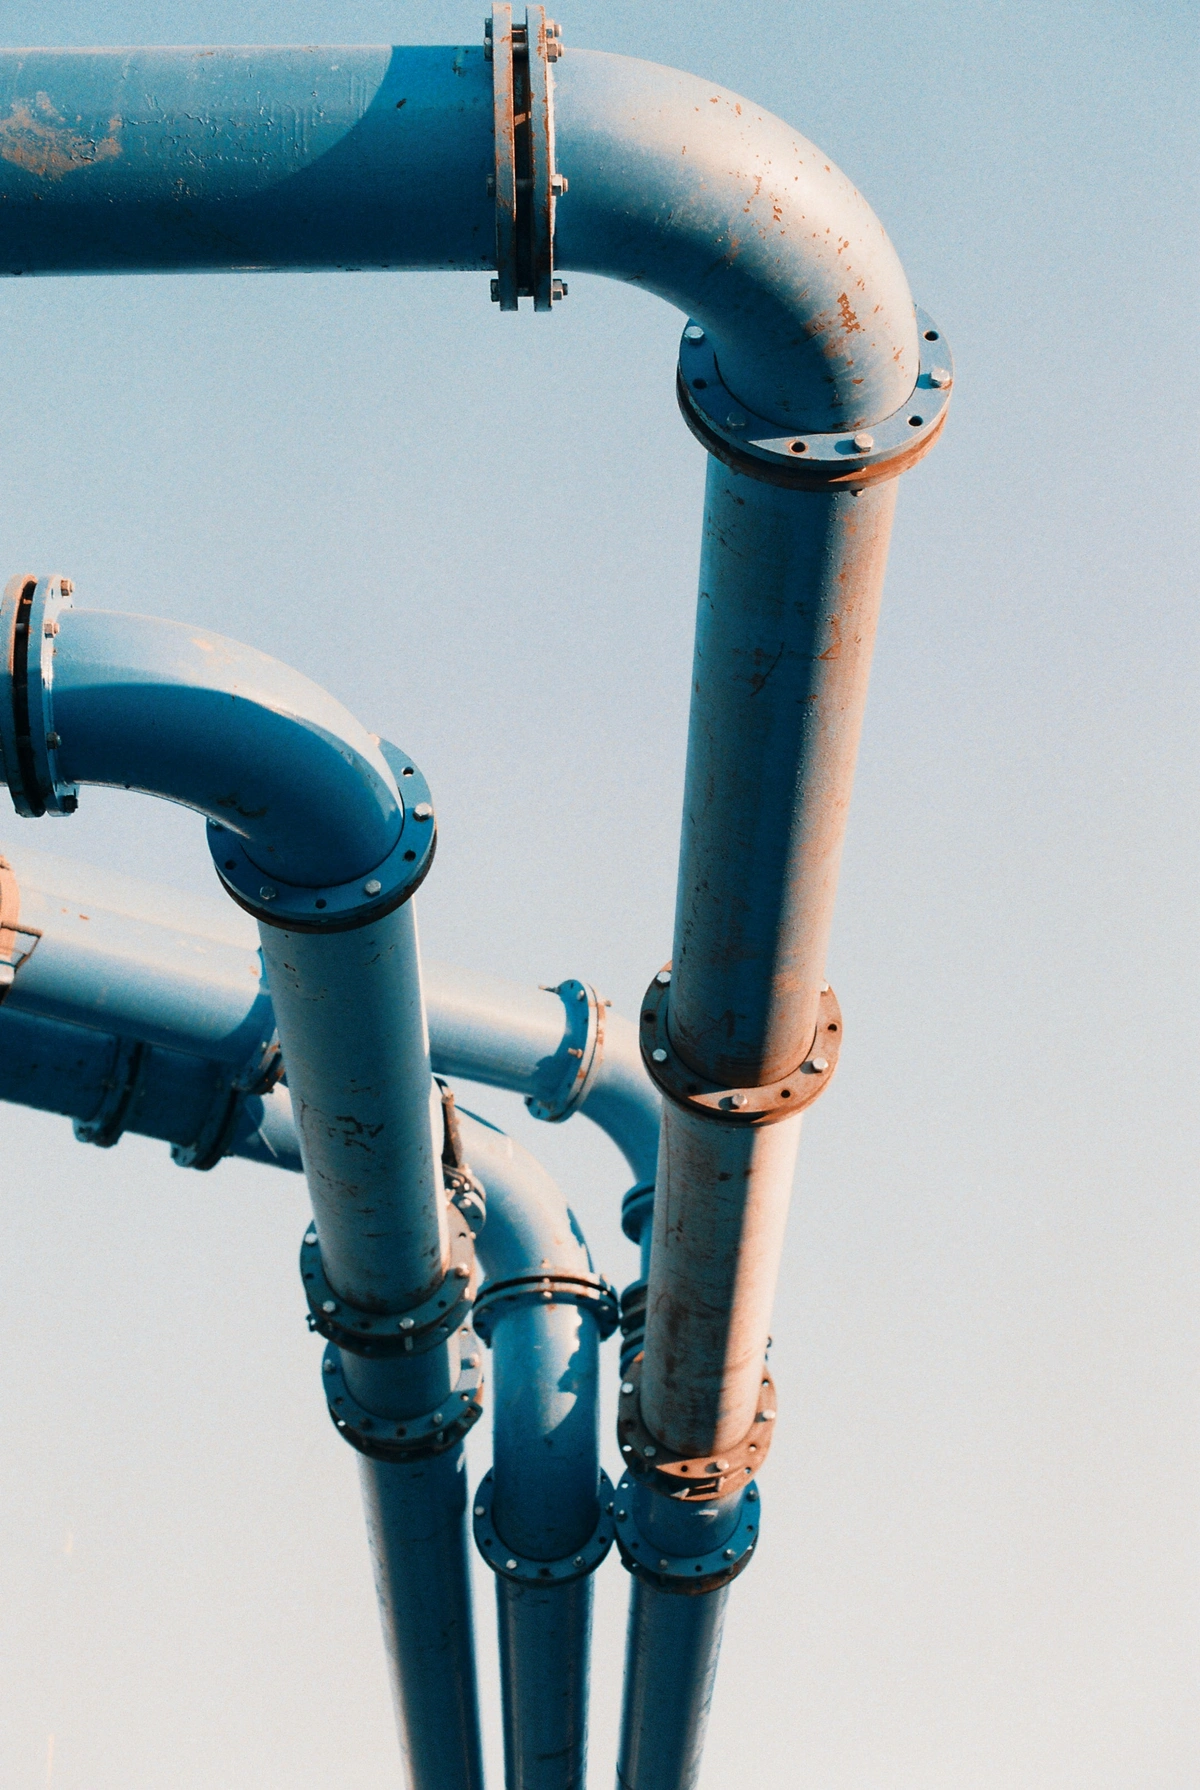 An image of a pipeline, which symbolizes the sales pipeline. Automating sales provides businesses with multiple benefits.